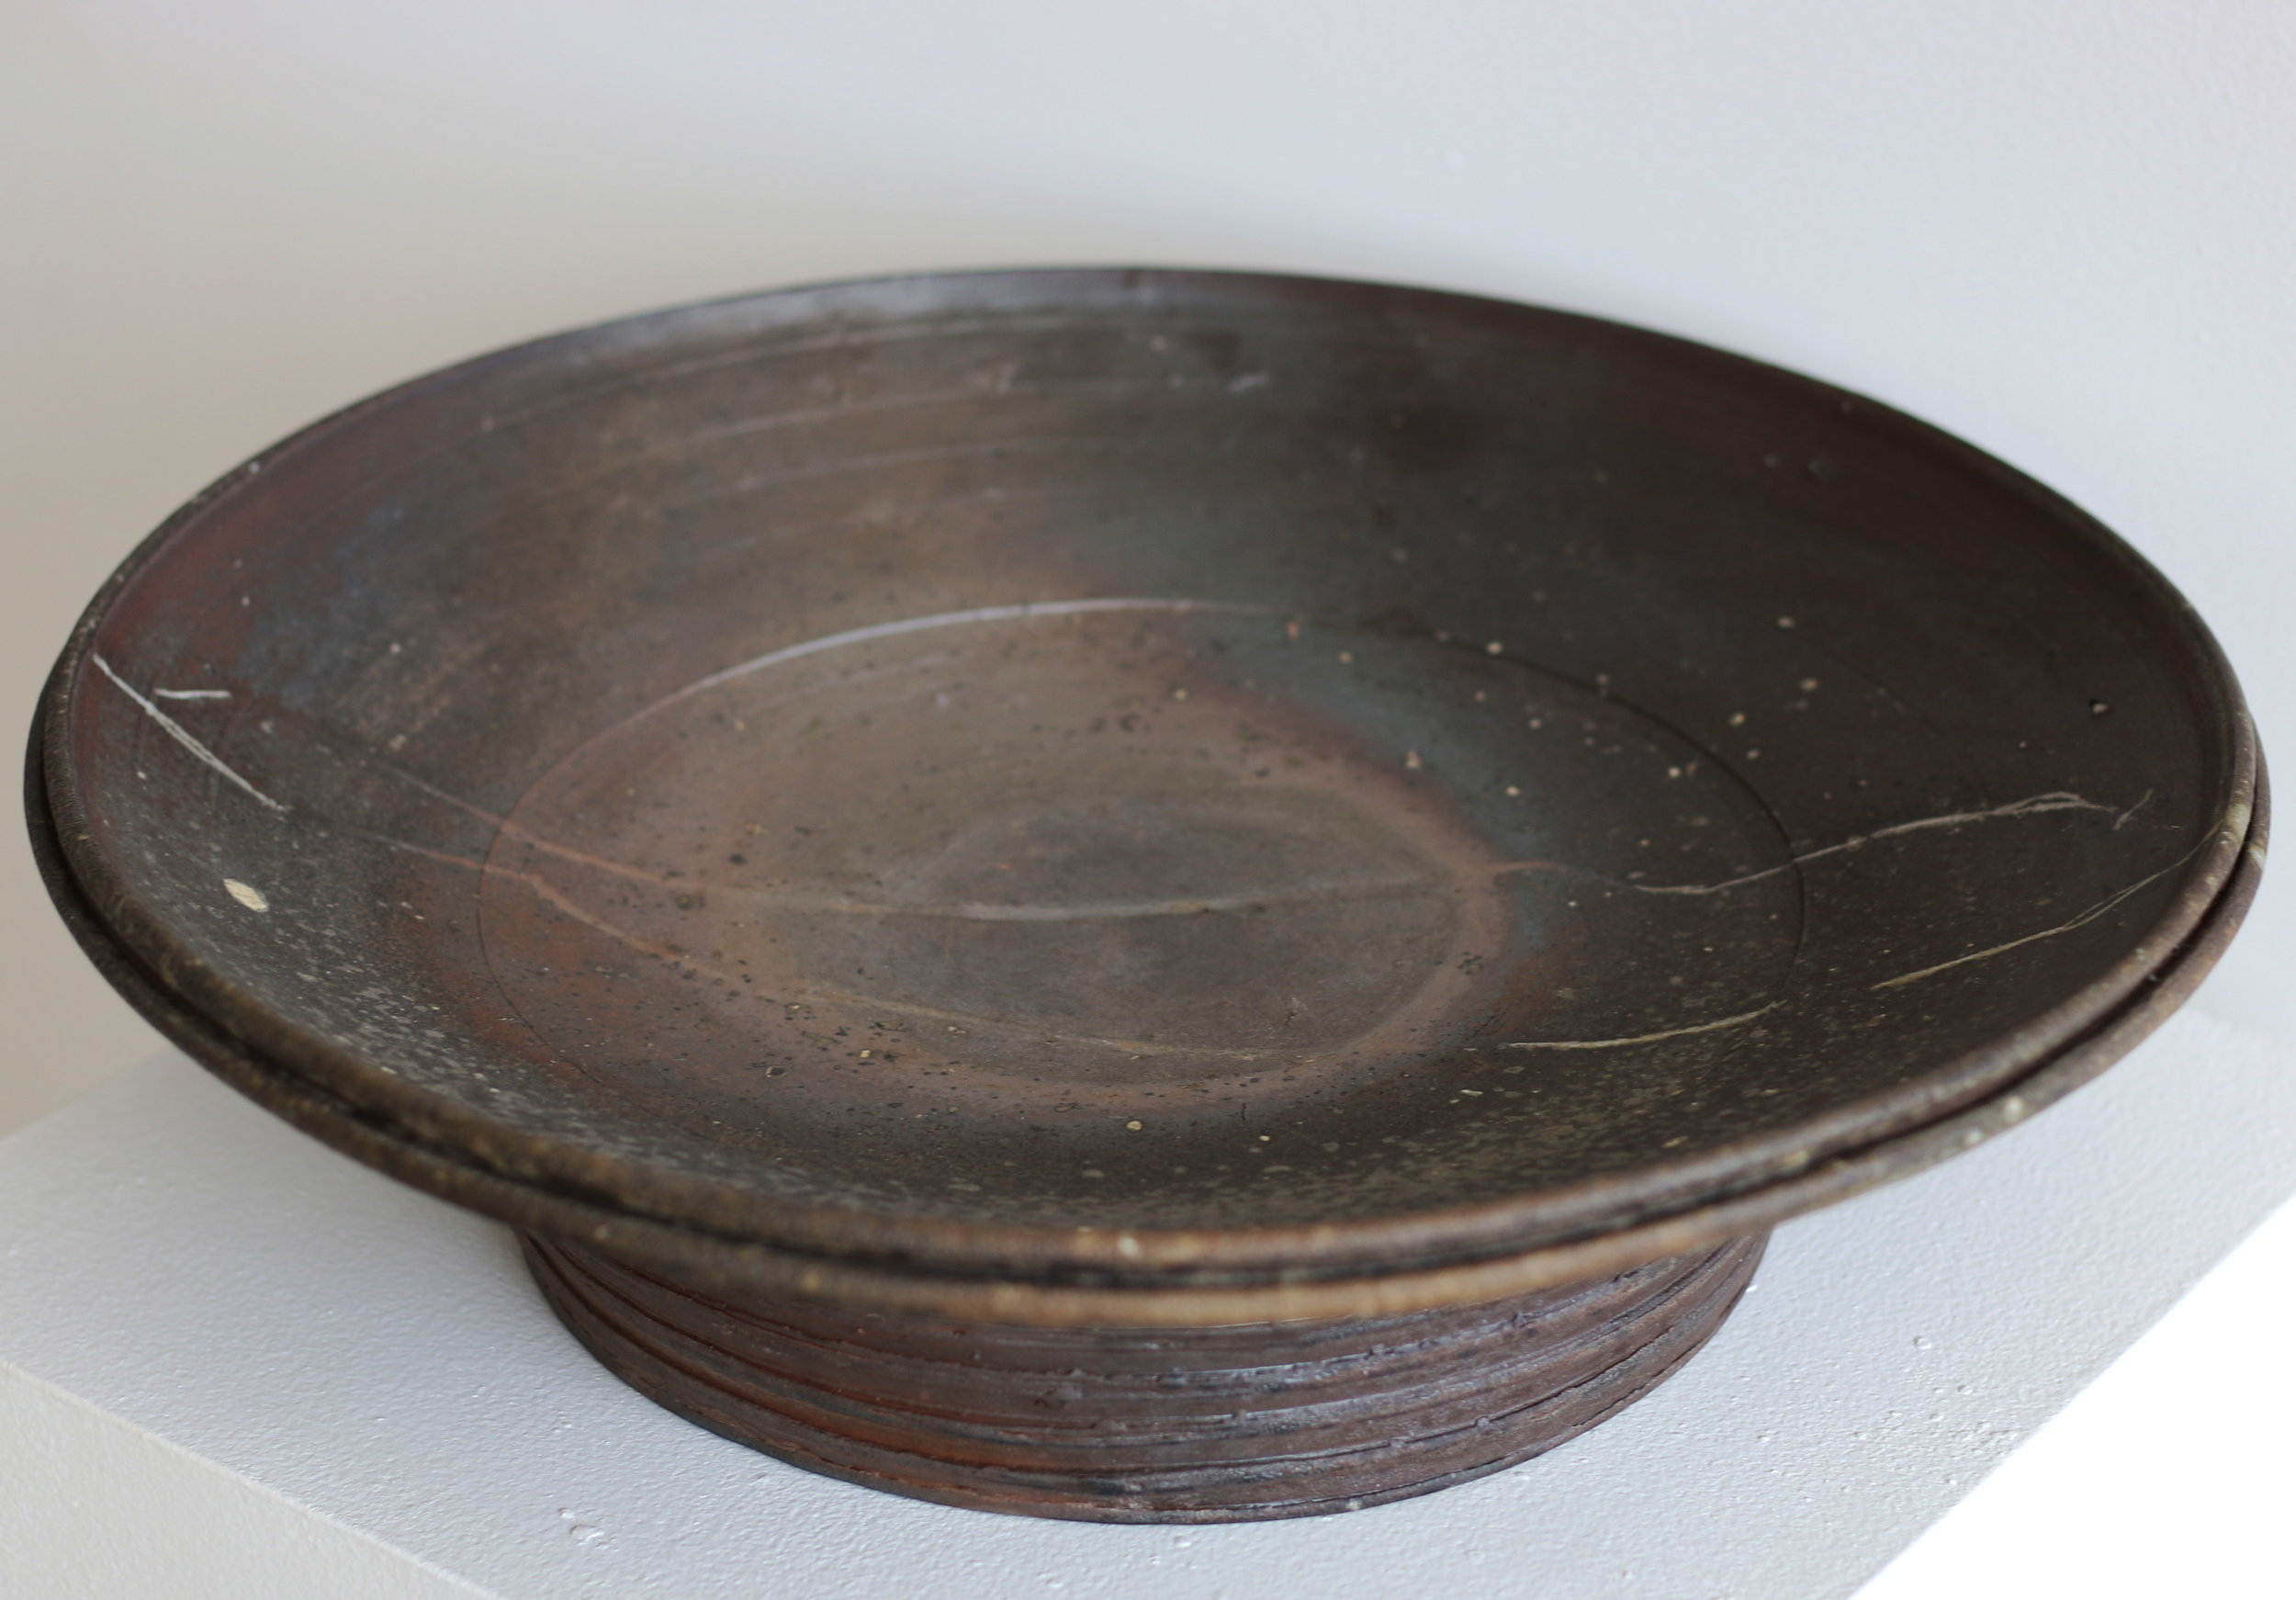 Wall Hanging Platter with Split Lip and Elevated Foot with Scraped Lines and Horsetail Markings (Large)